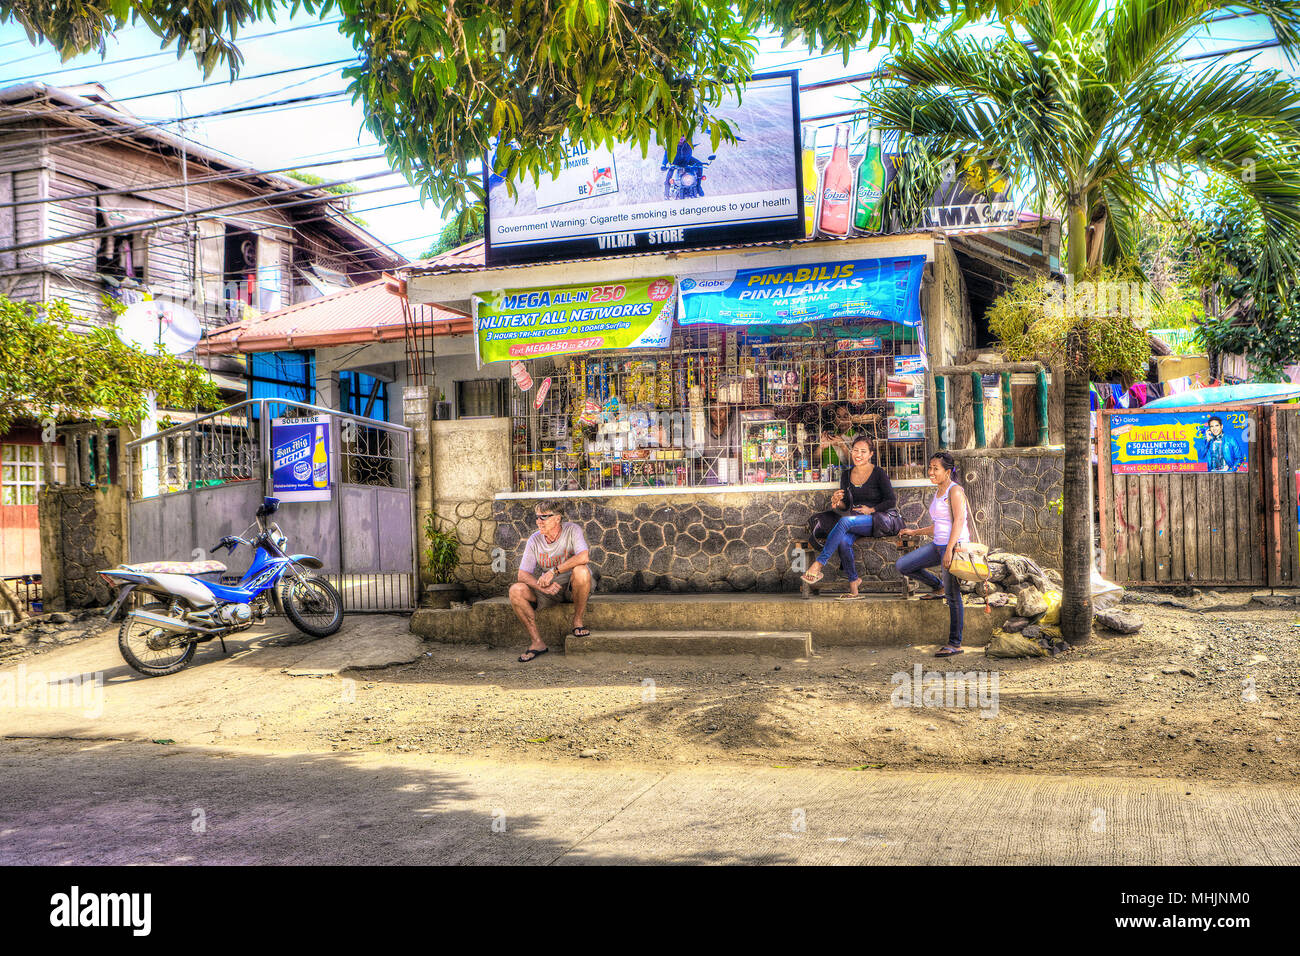 Life in the slow lane for three tourists visiting Puerto Princesa, Palawan, Philippine Islands stopping for a rest at a neighborhood convenience store Stock Photo